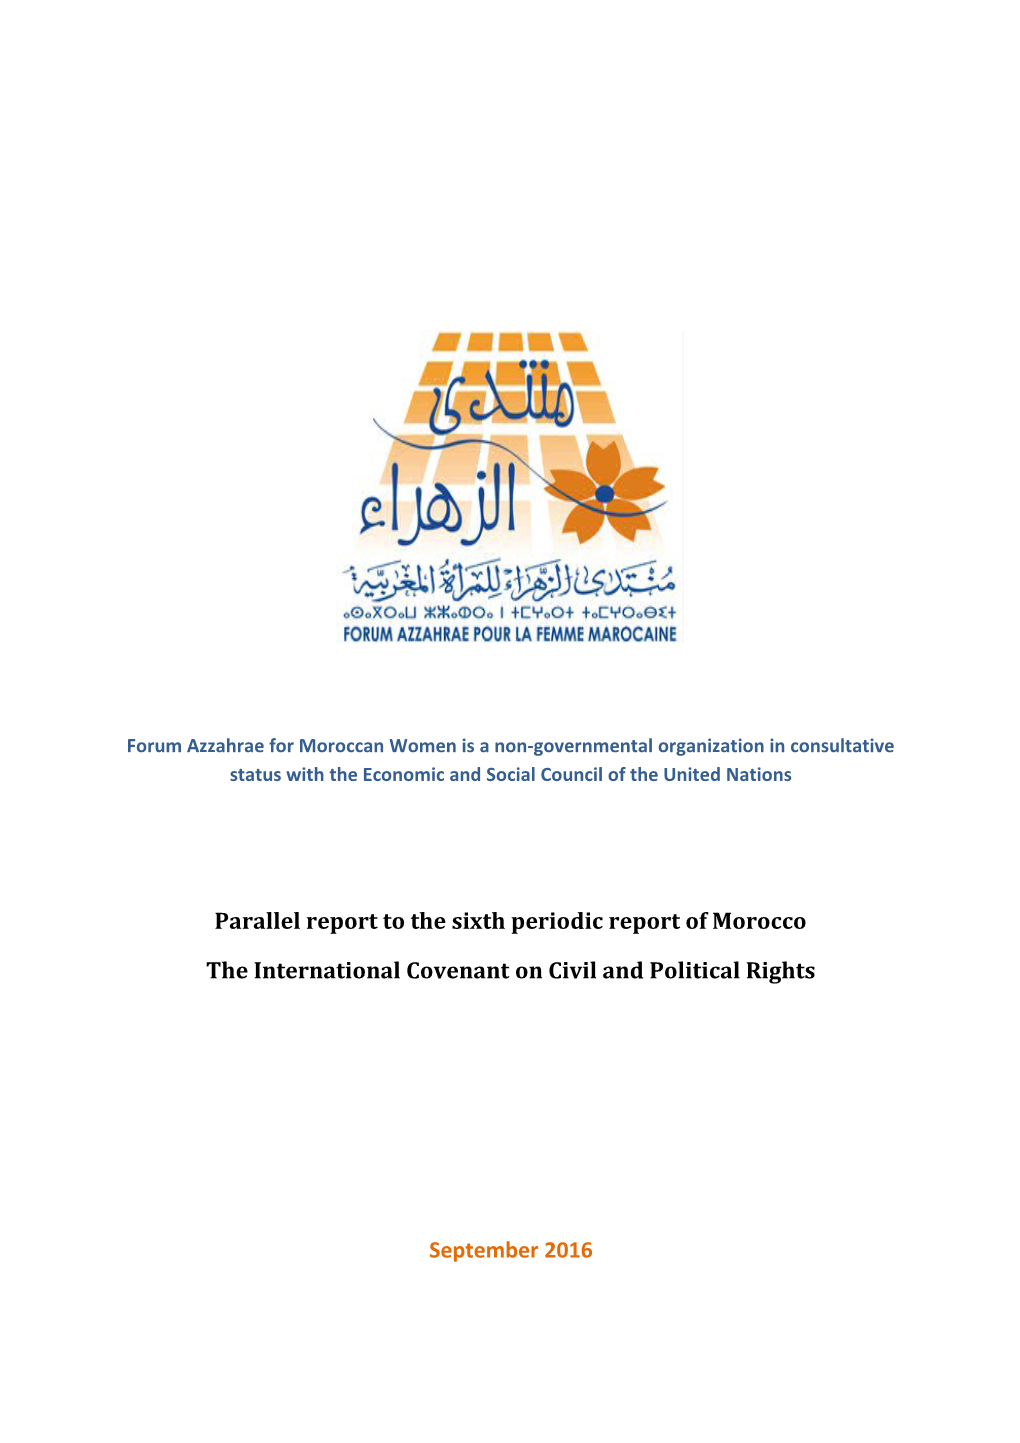 Parallel Report to the Sixth Periodic Report of Morocco